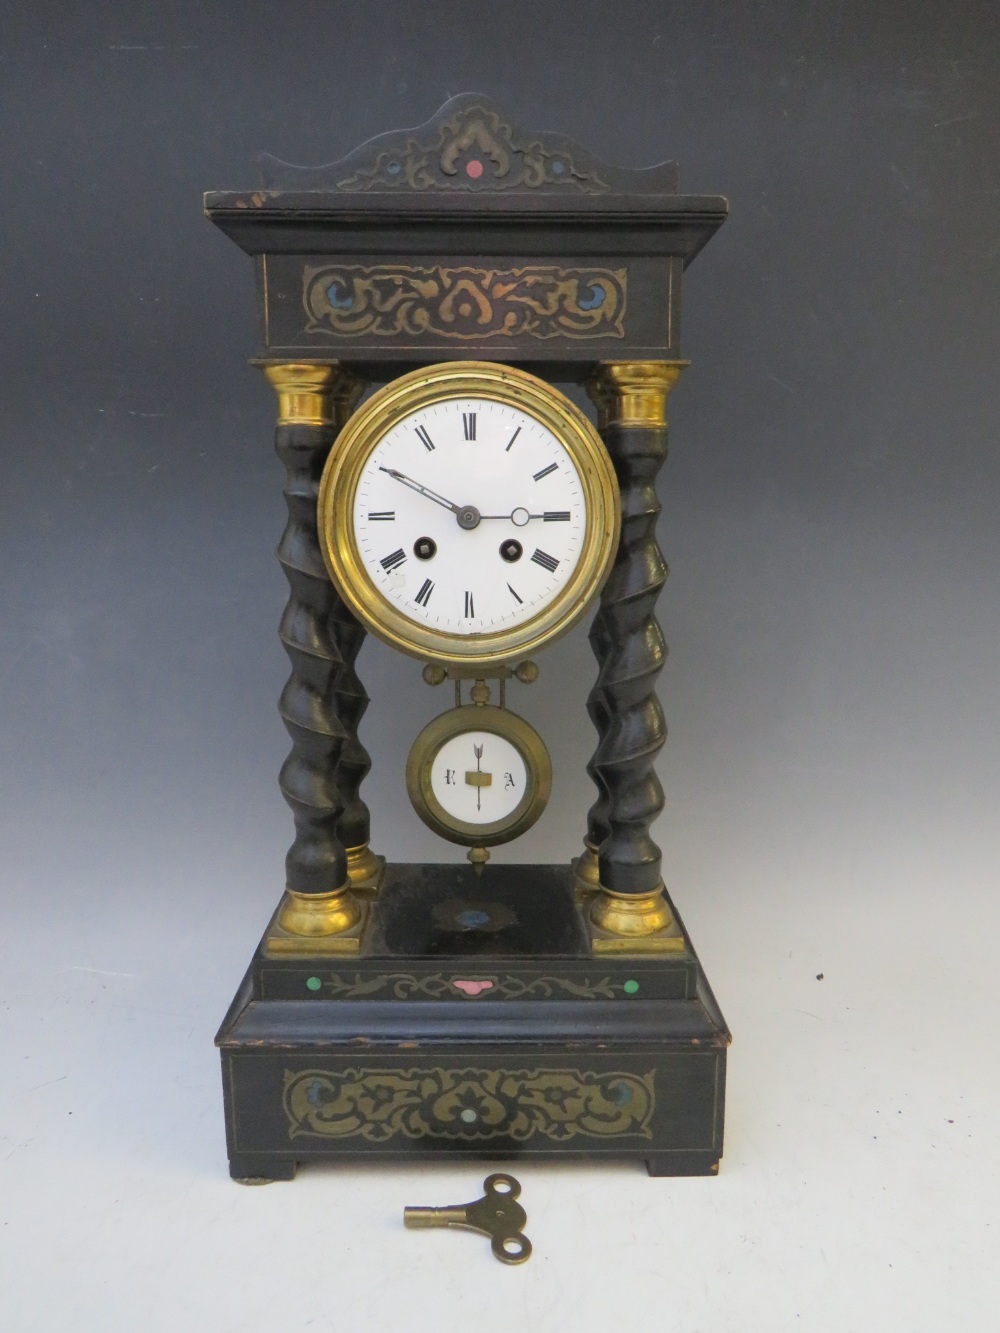 A LATE 19TH CENTURY PORTICO CLOCK, having a black ebonised frame with various boule embellishment